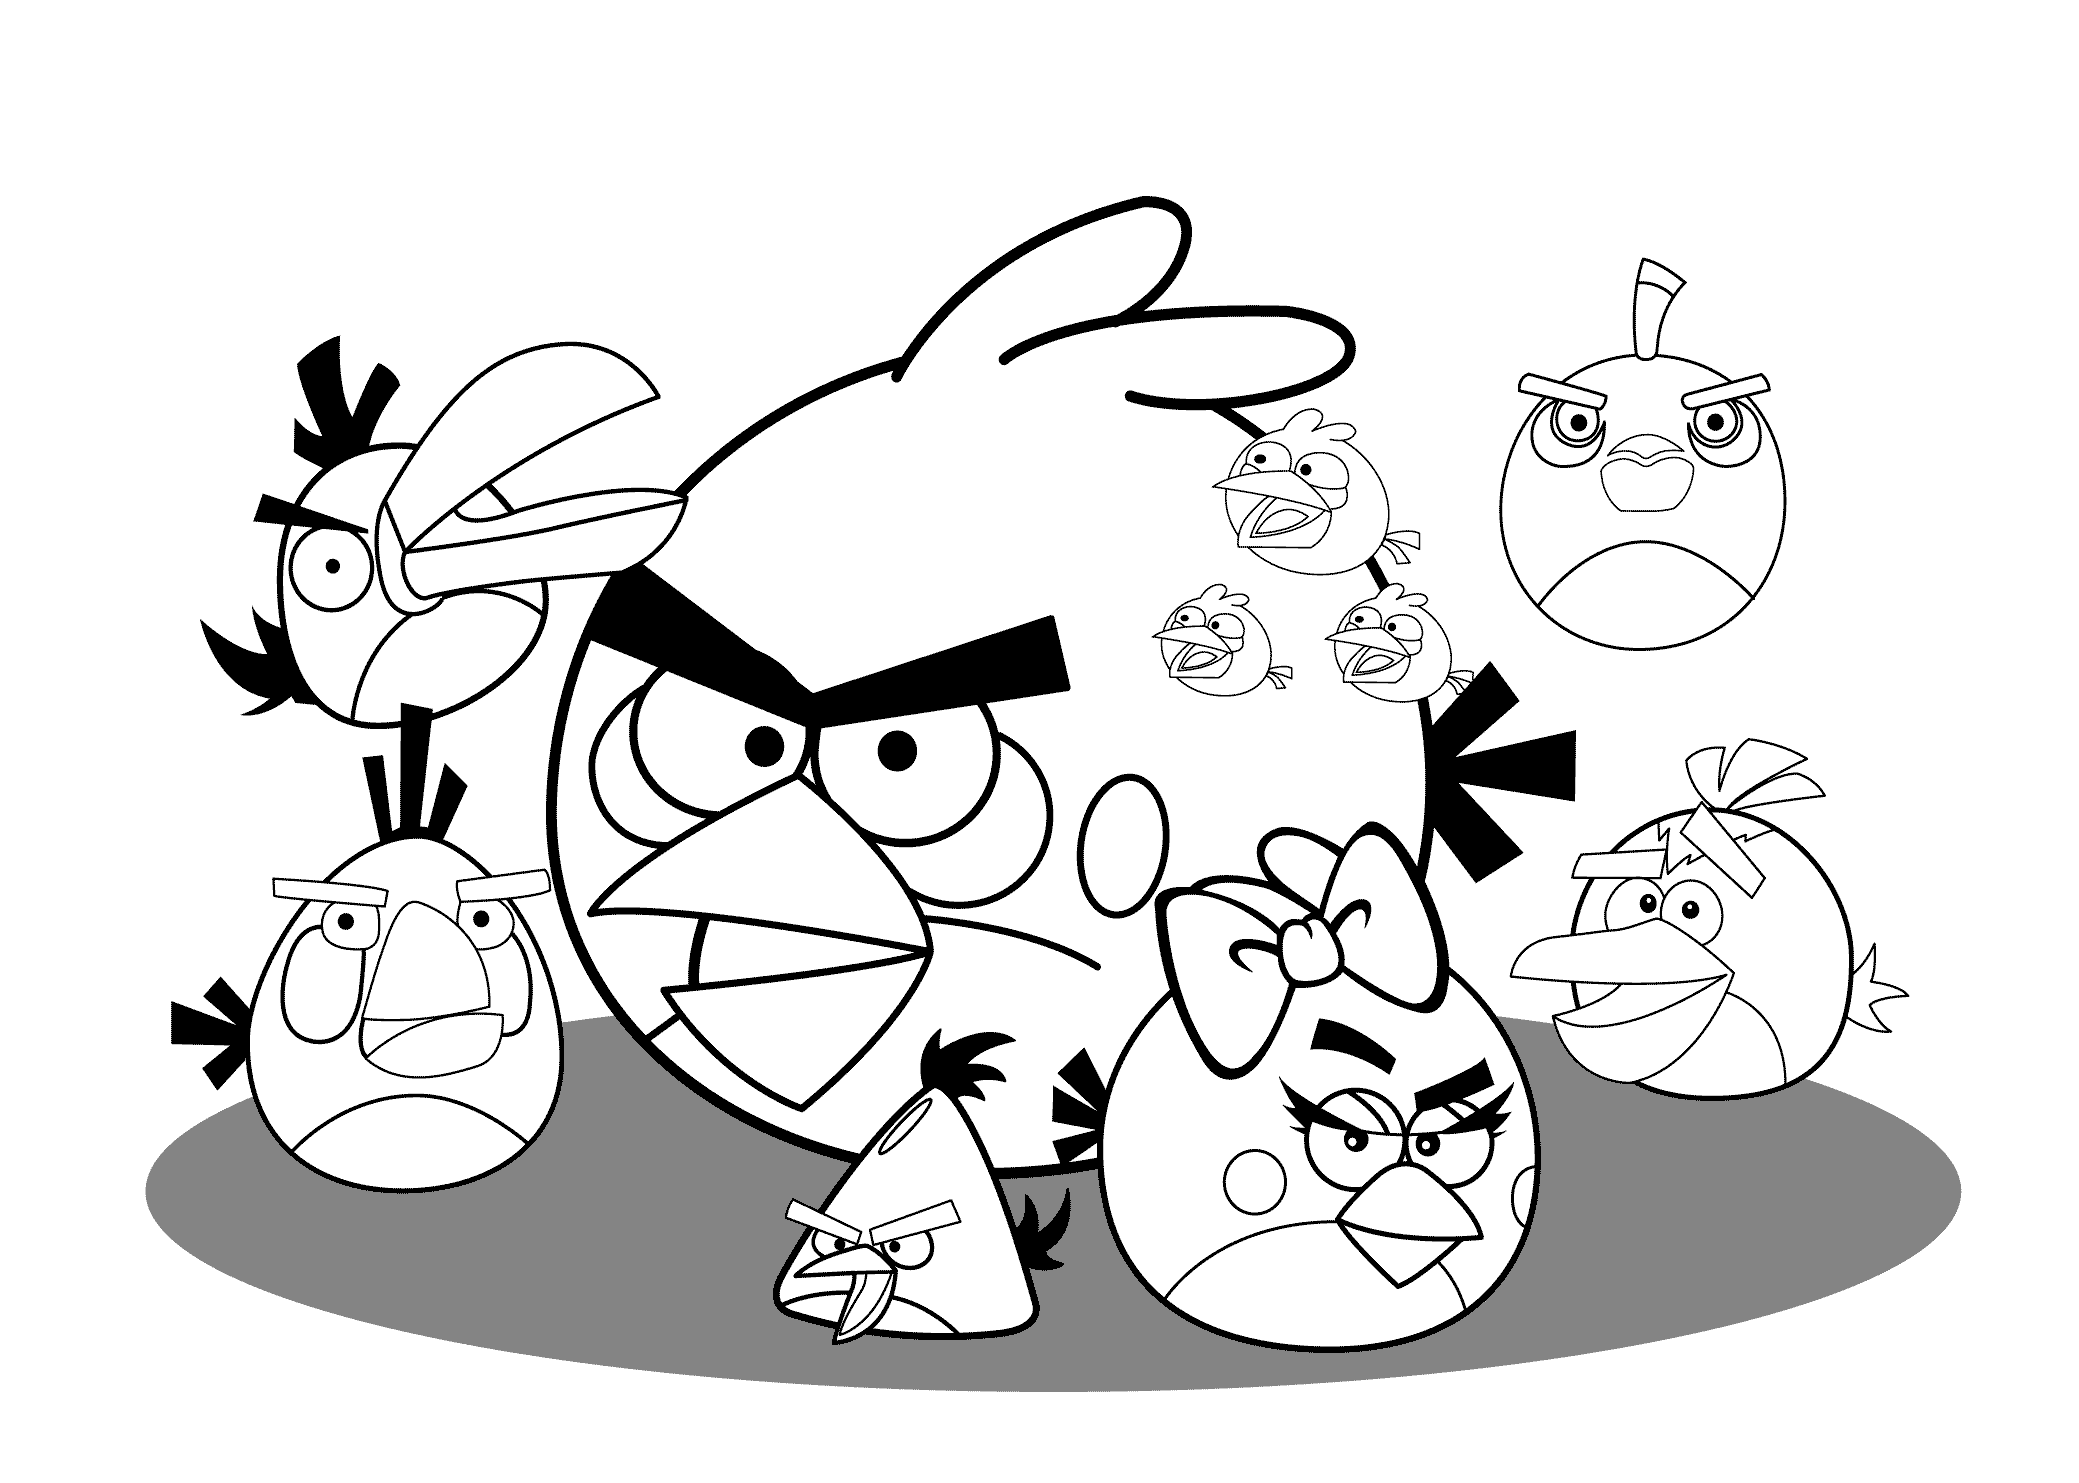 Cartoon Angry Birds Coloring Pages For Kids for Adult